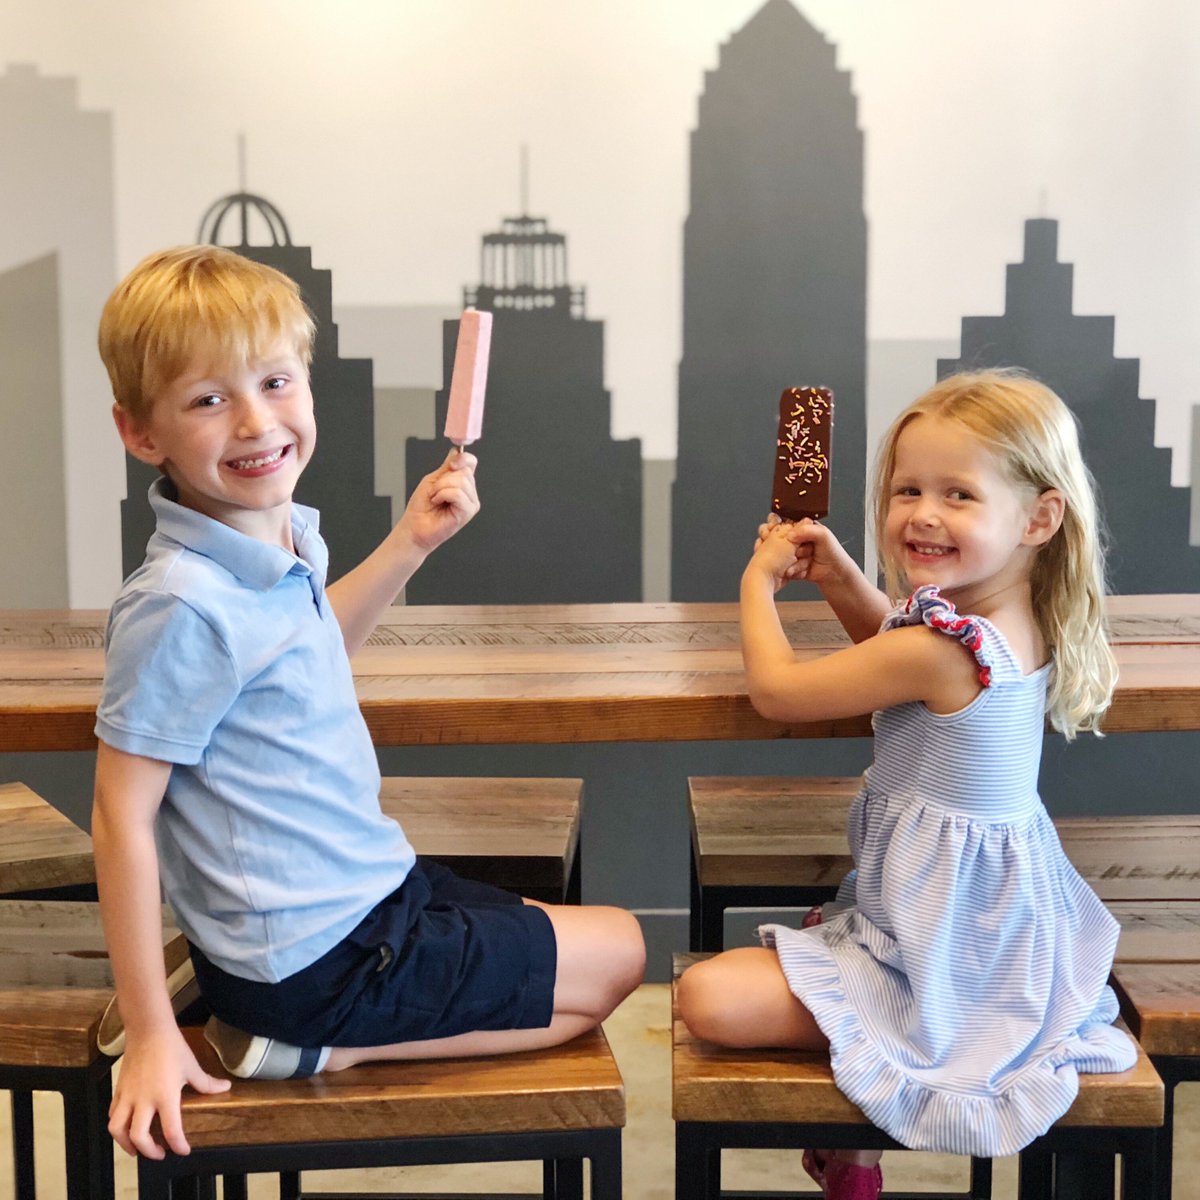 Exciting news! I'm giving away 10 tickets to the first ever Pop Tasting Event for Kids at @SteelCityPops in Decatur! Check out my post on Instagram to see how to enter: instagram.com/p/BmjMsL8hWZx/… #atlanta #atlantamom #exploreatlanta #atlantaeats #decatur #decaturga #decaturmom